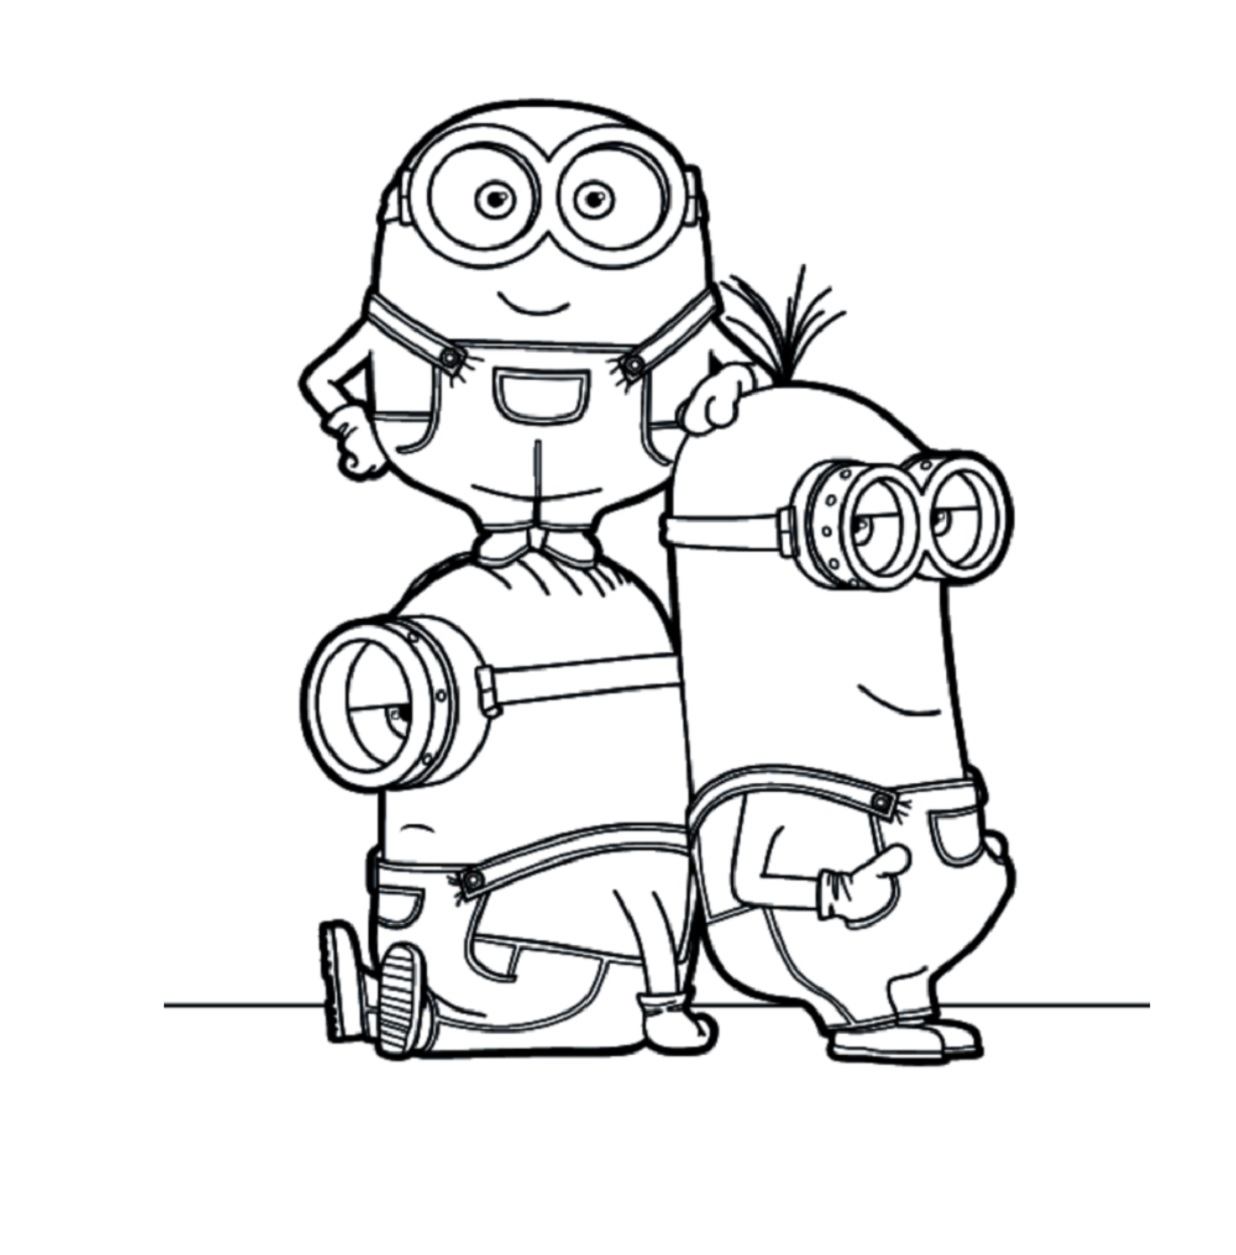 Printable Three tiny minions together Coloring Page for kids.